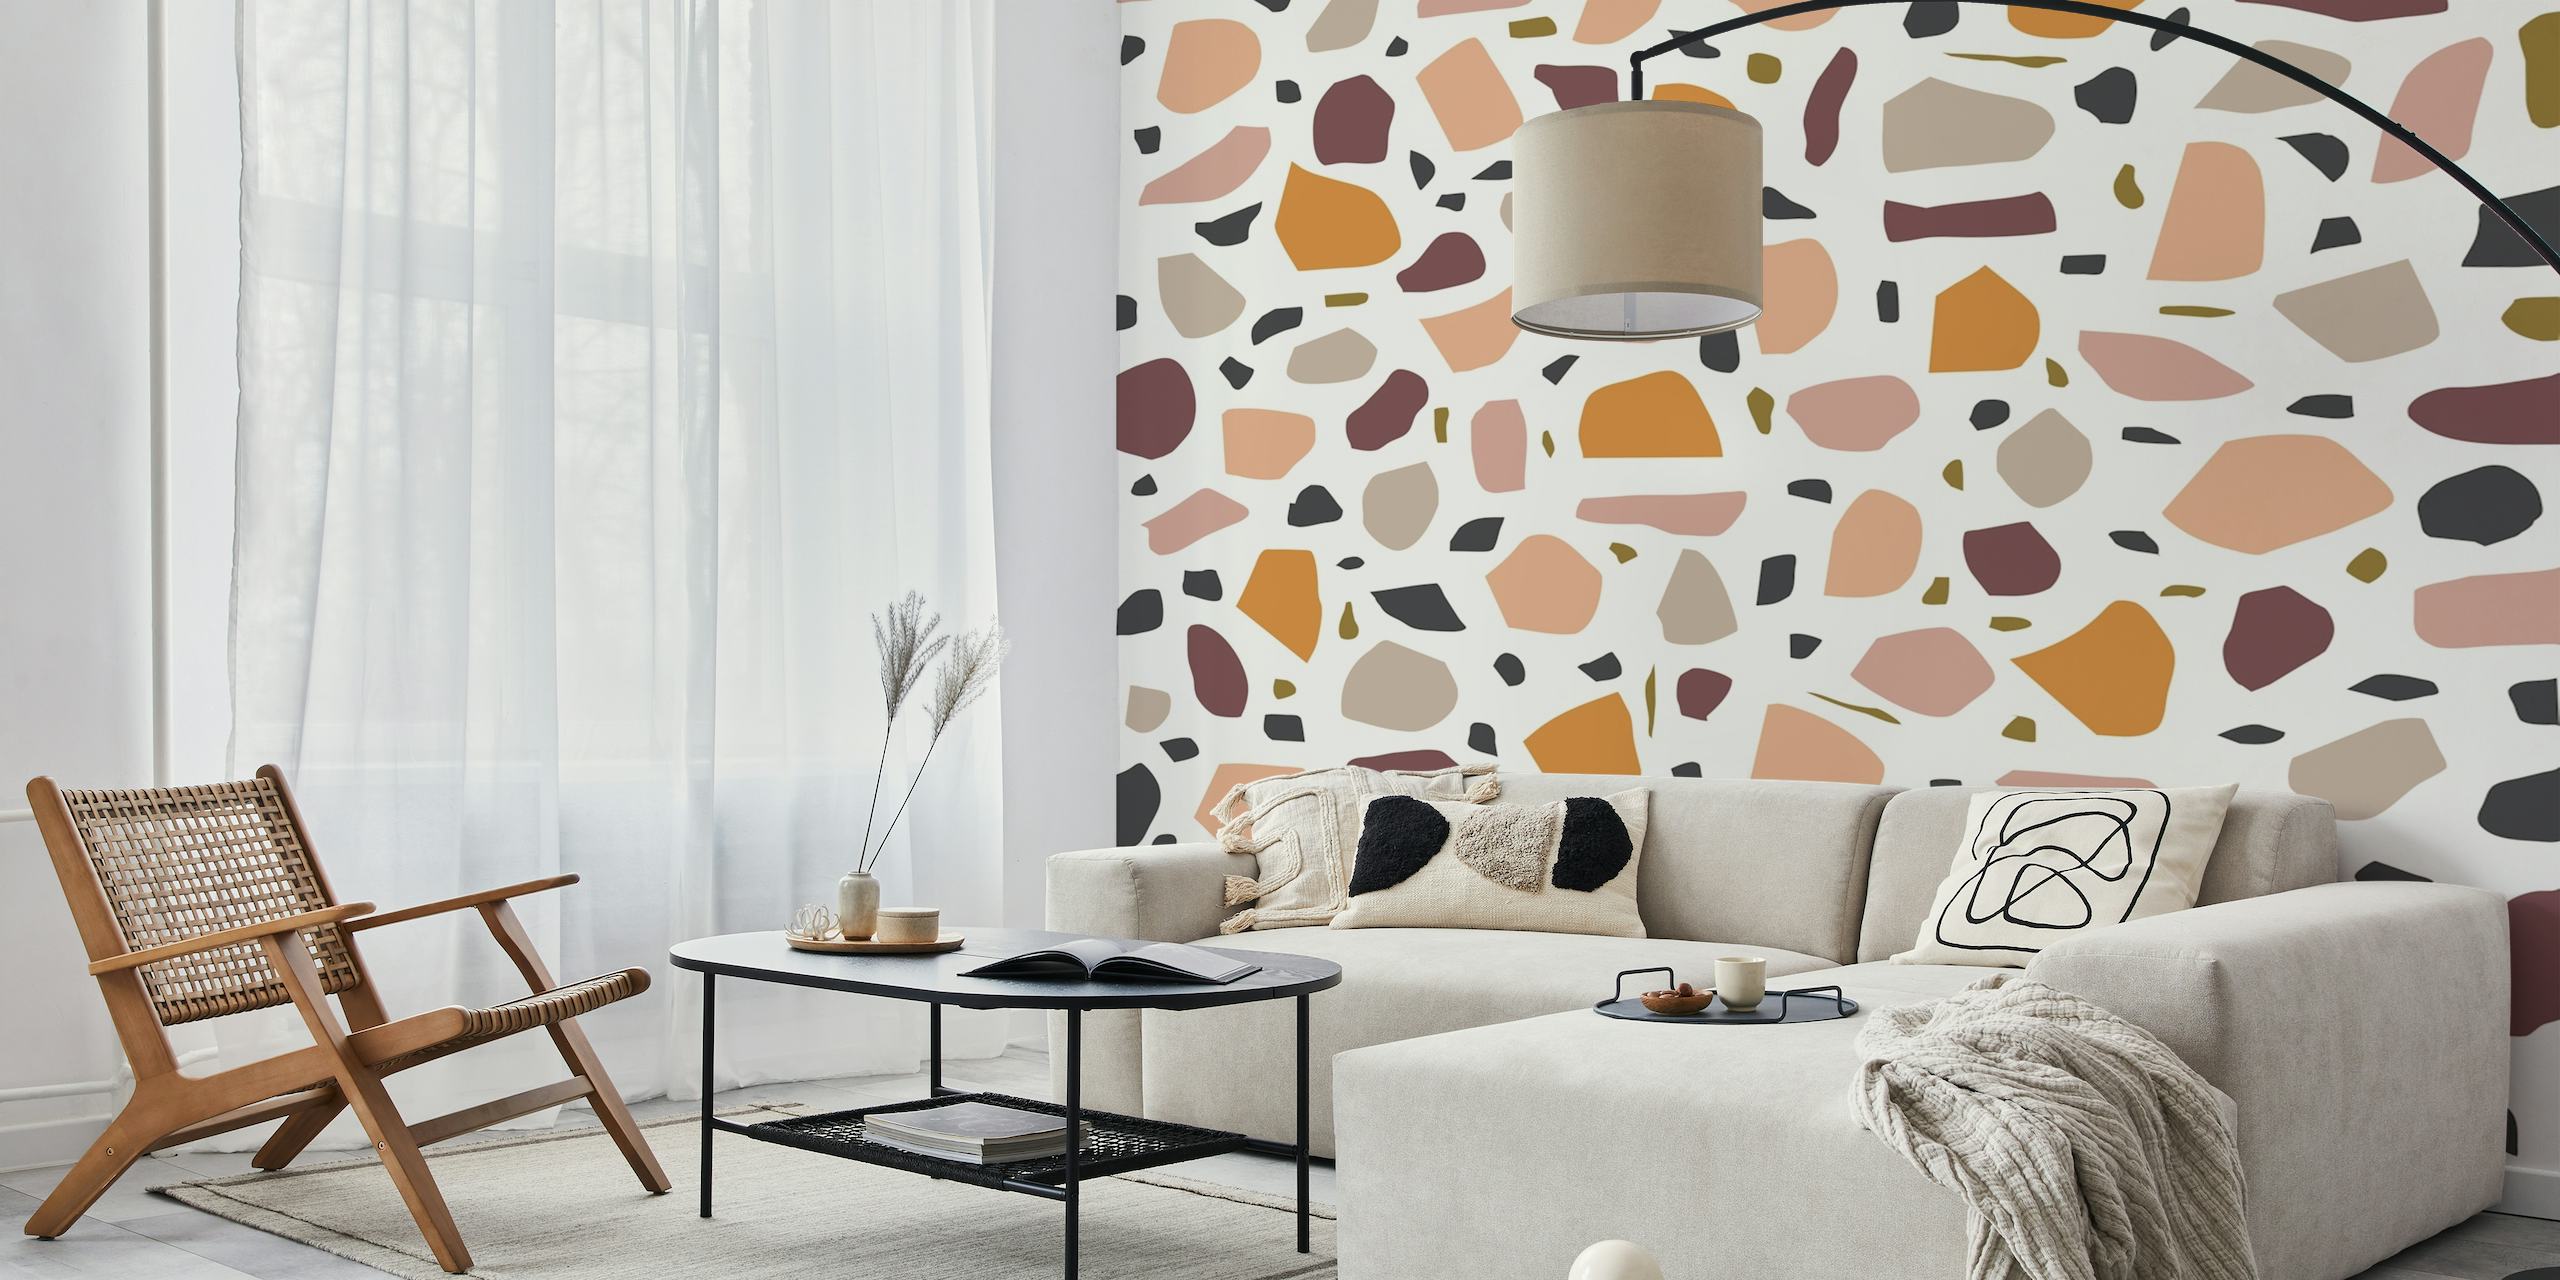 Terrazzo patterned wall mural with warm and neutral toned flecks on a white background